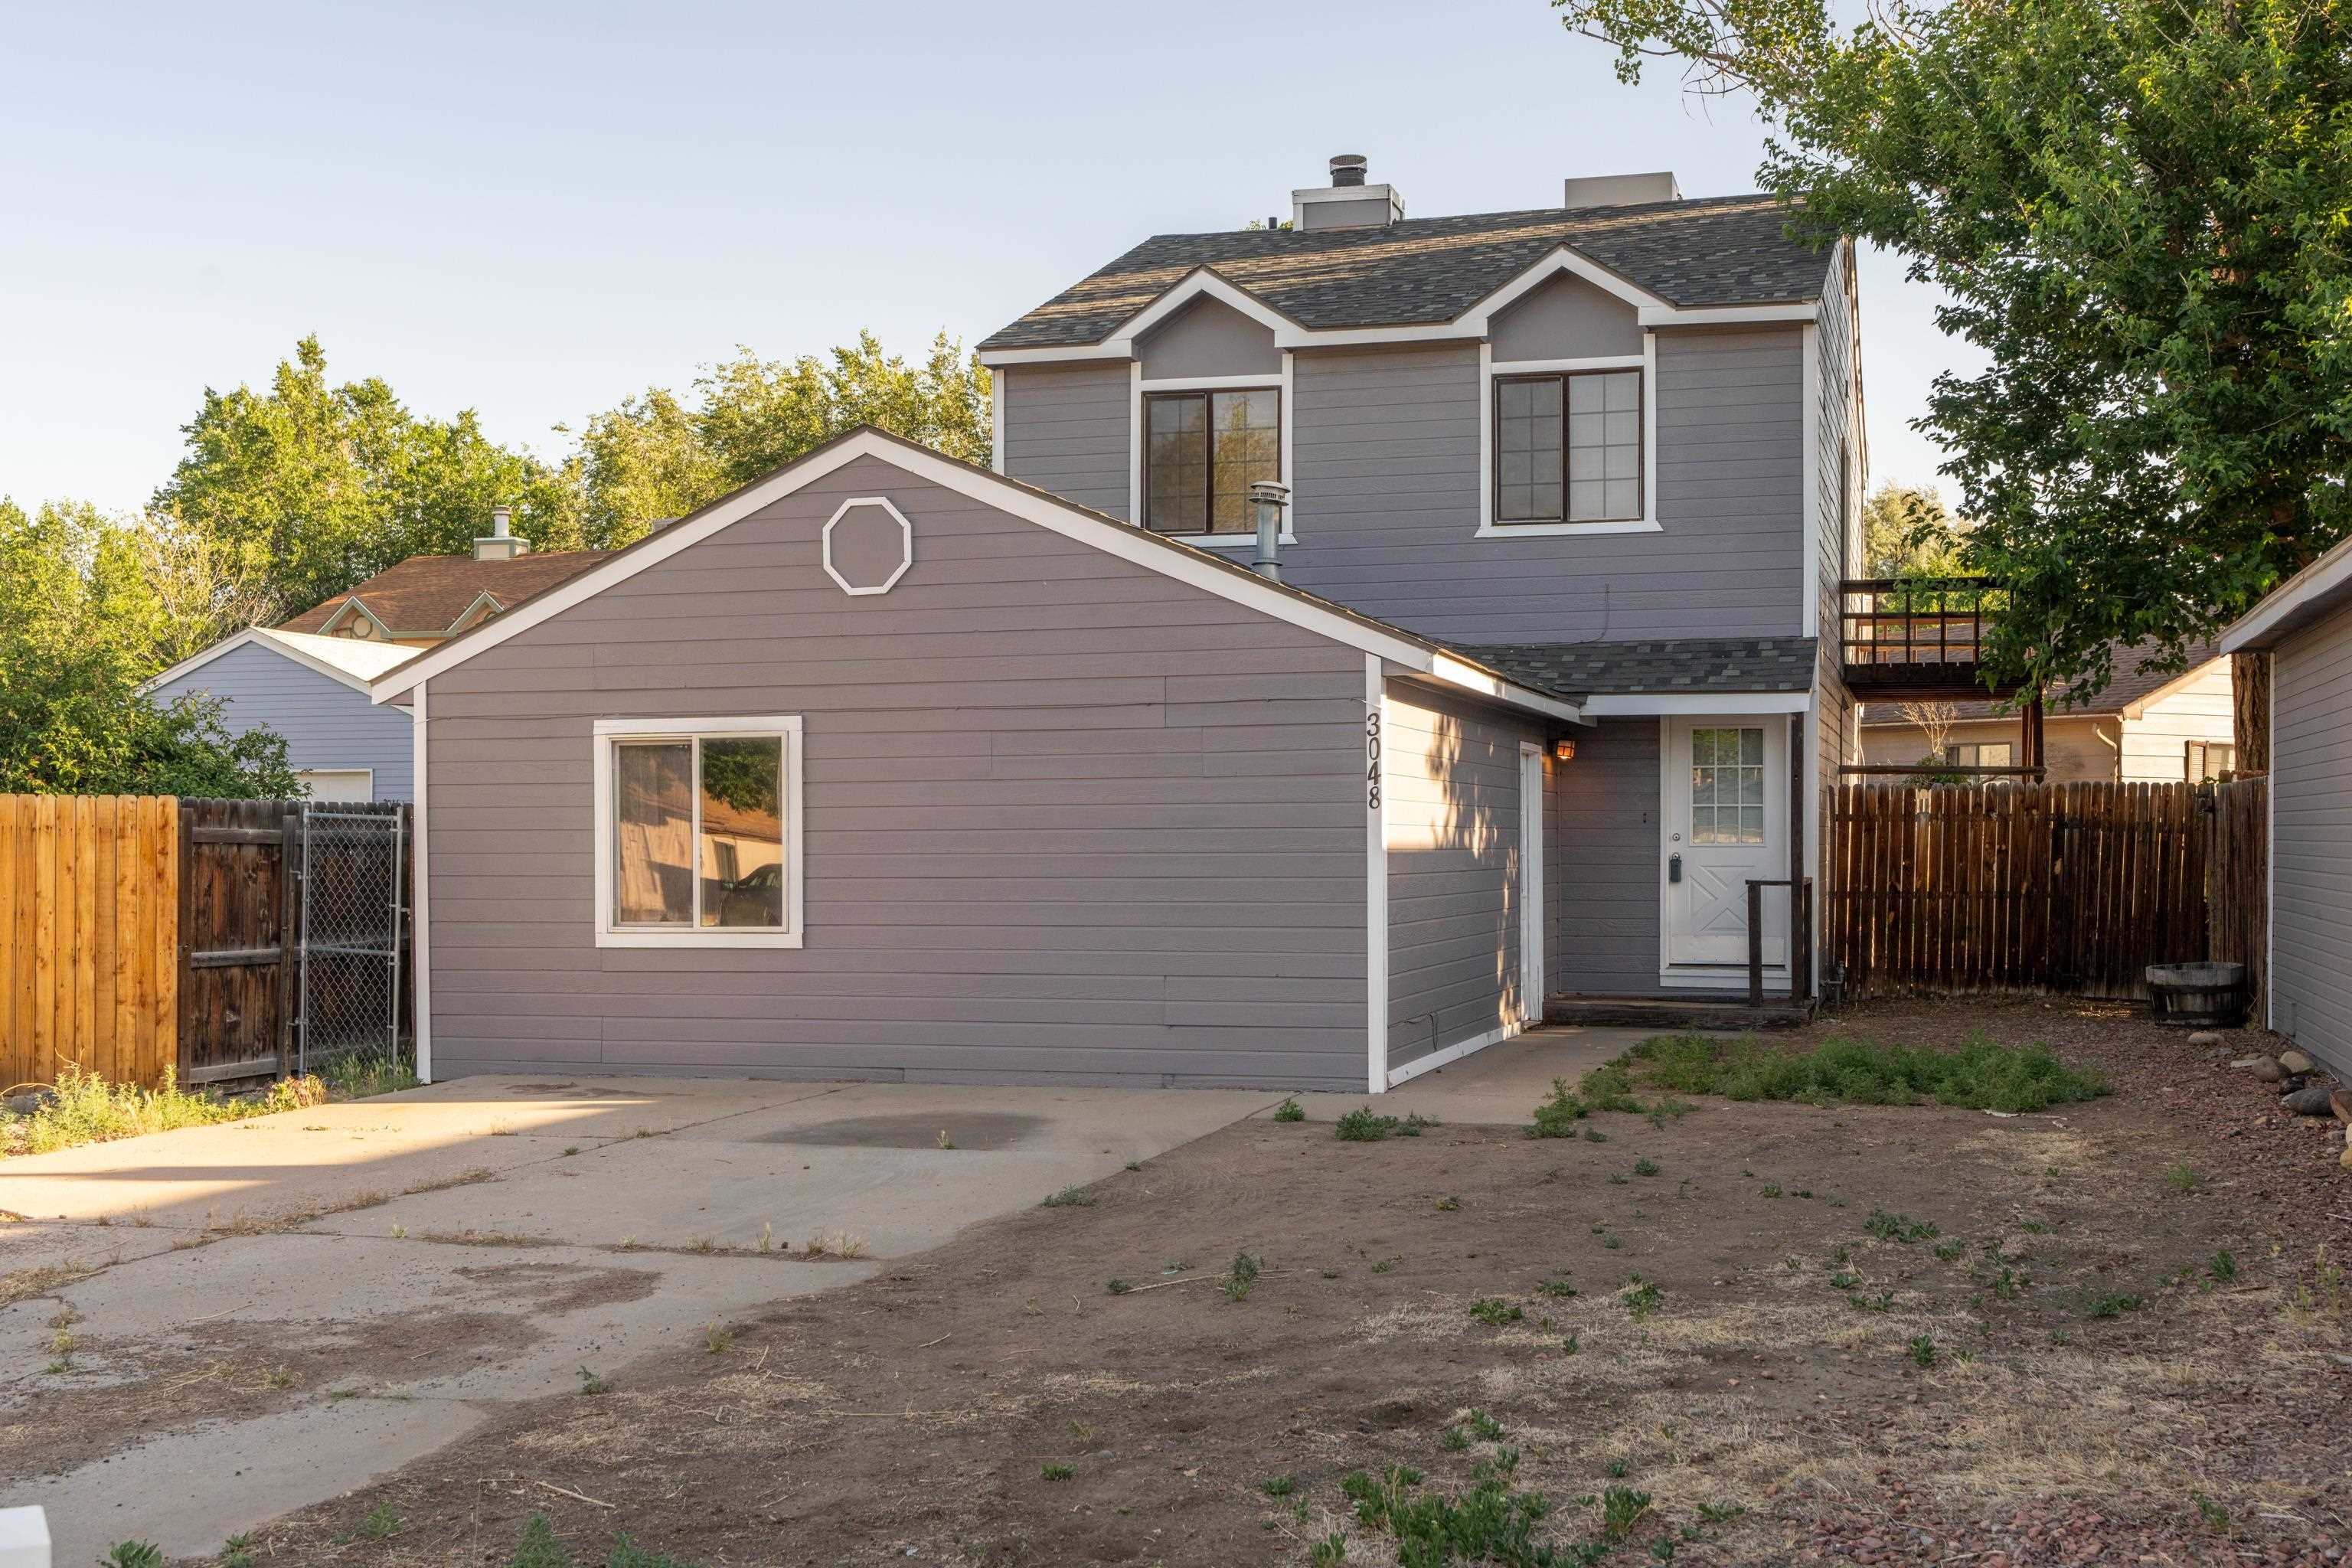 Great home in a convenient NE location. This home offers 3 bedrooms, 1 full bathroom and a 1/2 bath. Brand new flooring, newer carpet, freshly painted exterior and a huge bonus room.